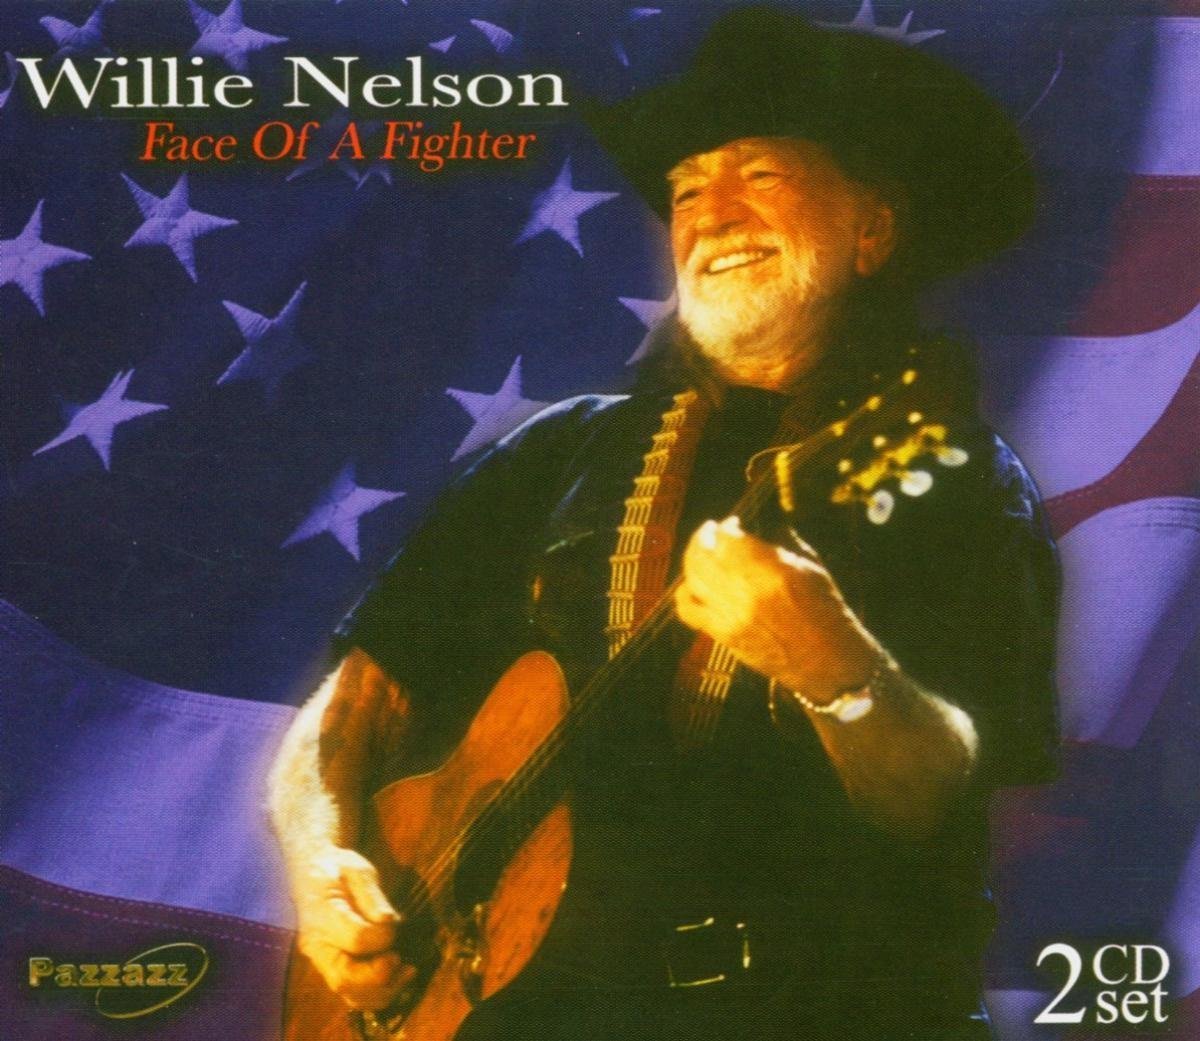 Willie Nelson - Face Of A Fighter (2 CD) - Willie Nelson